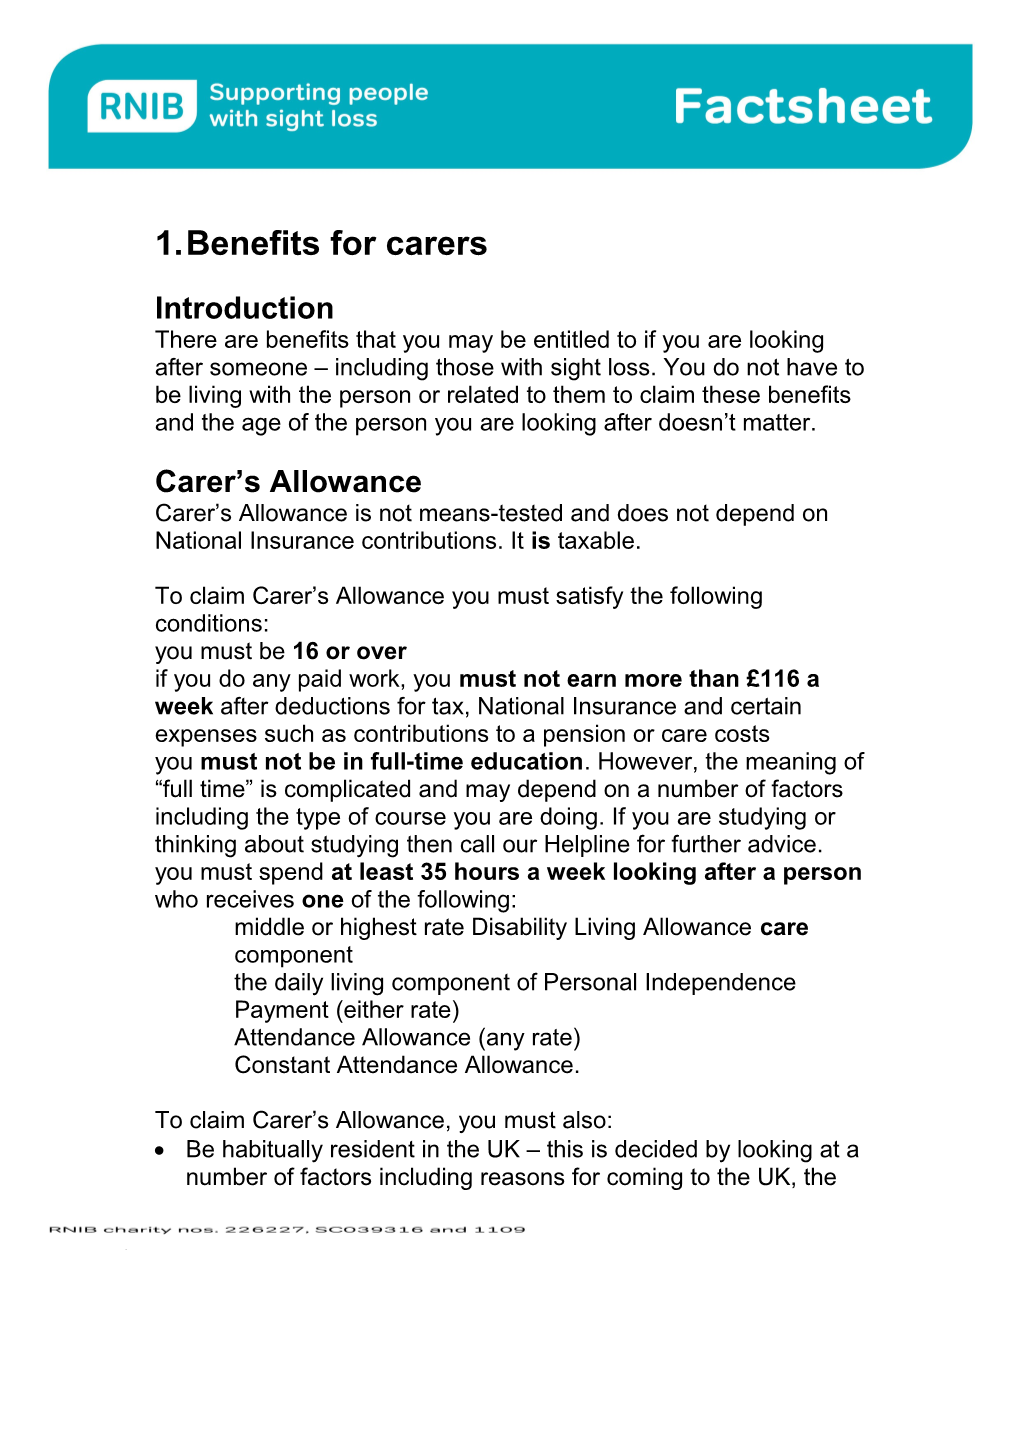 Benefits for Carers